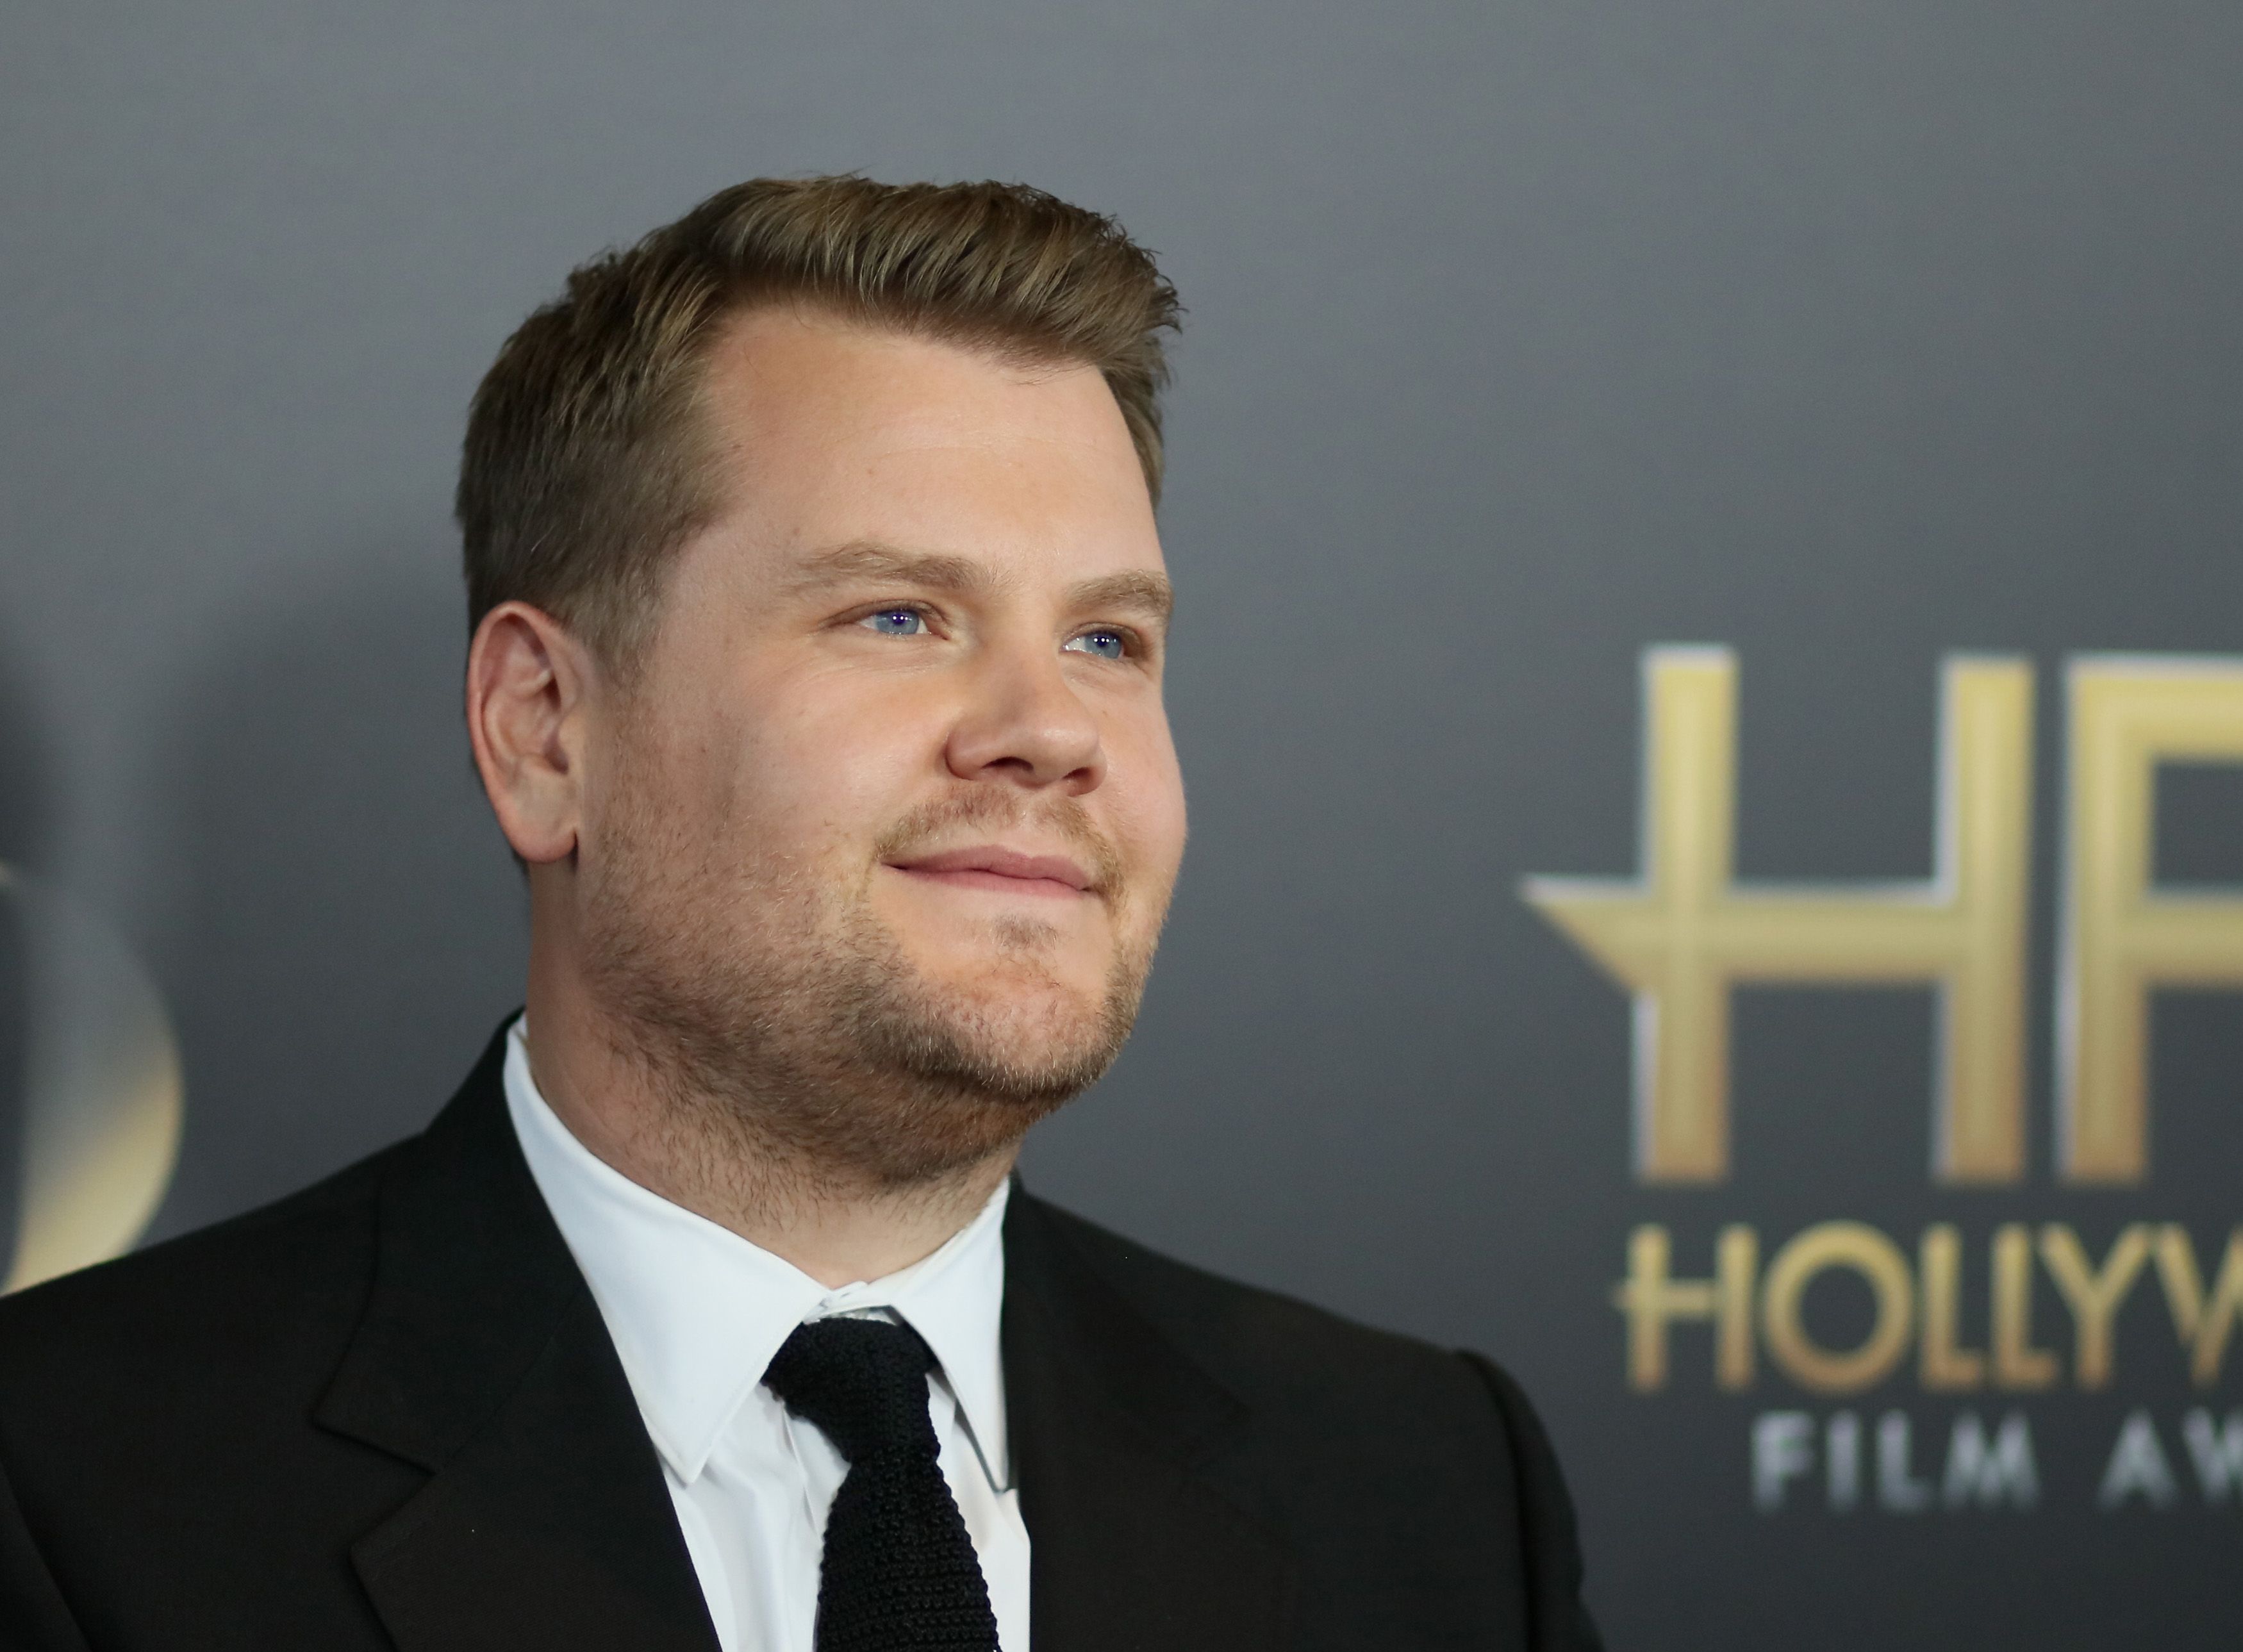 Grammys 2017 Host James Corden is the New King of Late Night TV